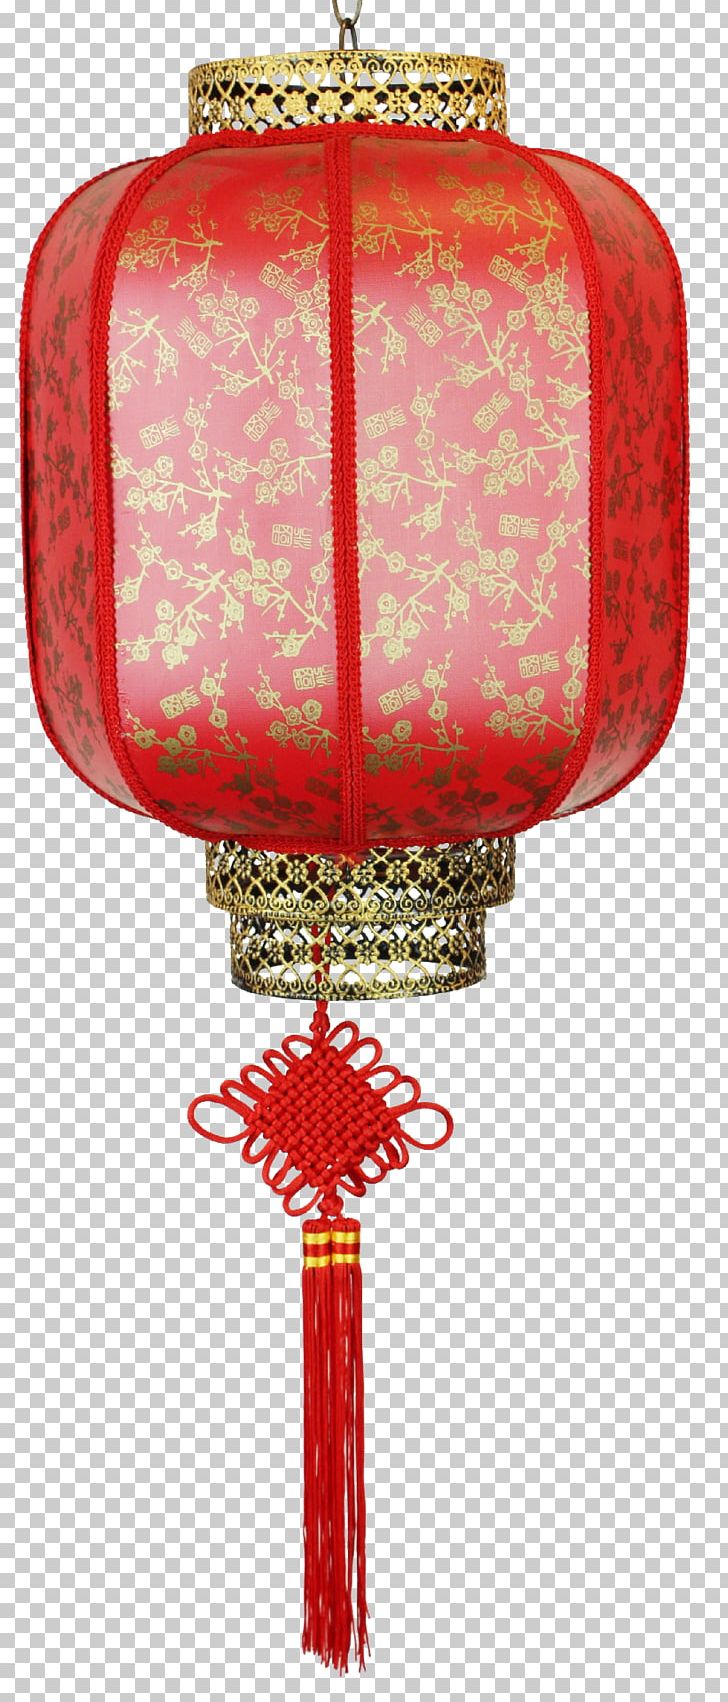 Lantern Festival First Full Moon Festival Chinese New Year PNG, Clipart, Carved, Carved Metal, Chinese, Chinese Lantern, Download Free PNG Download